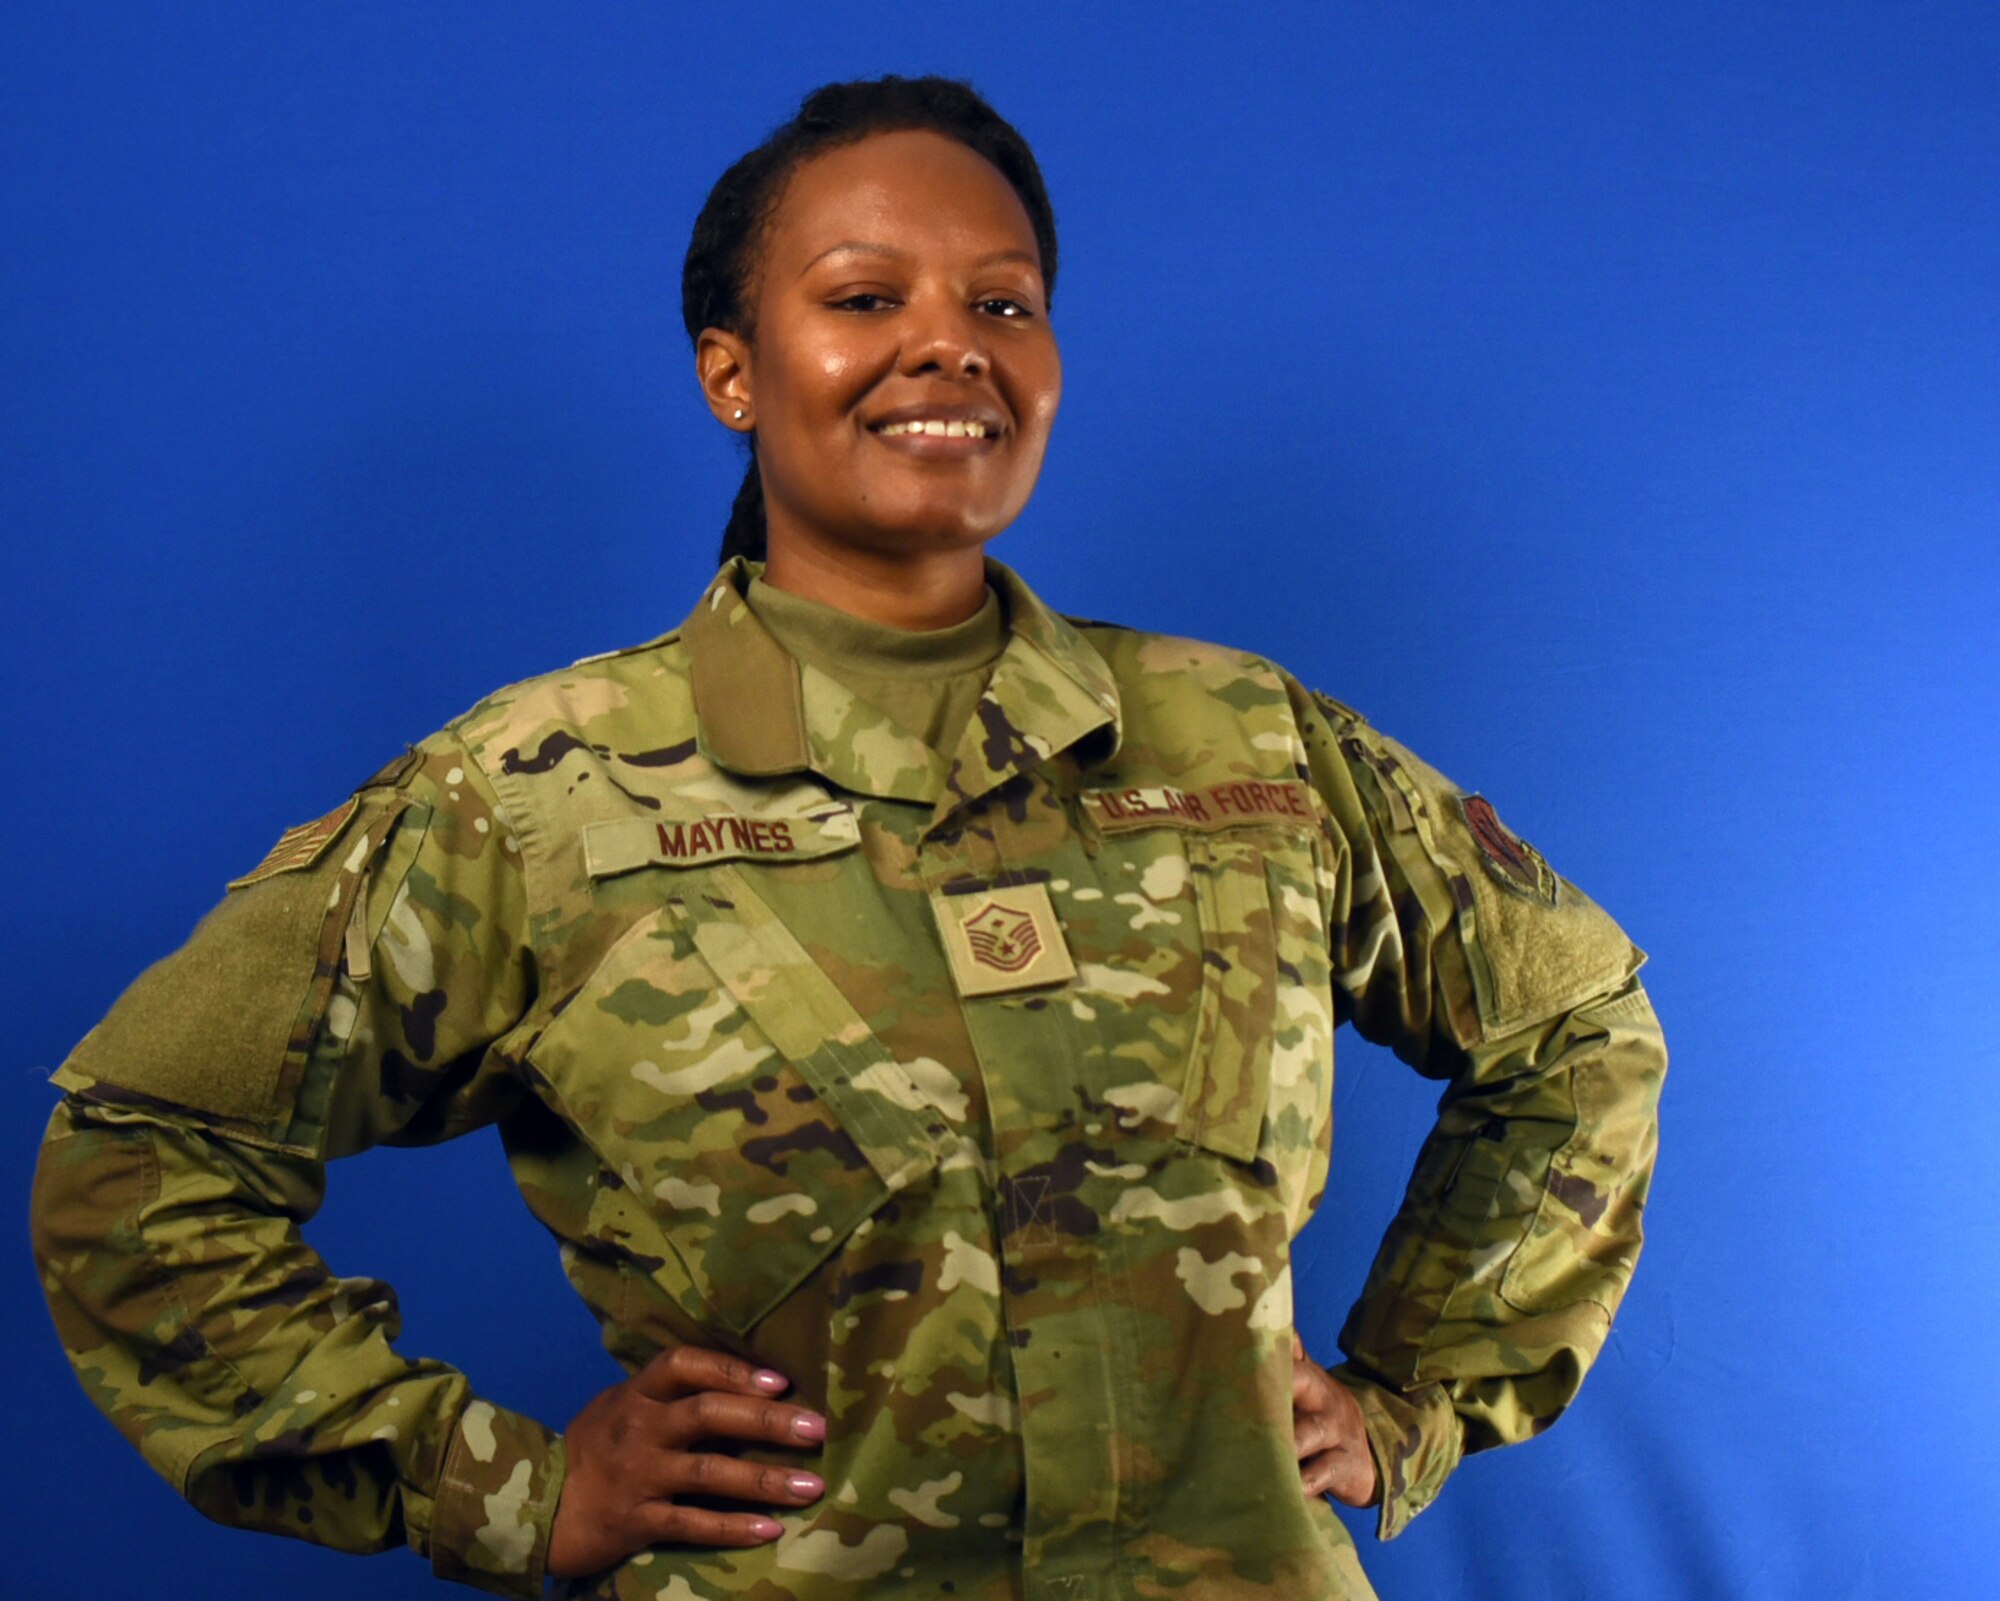 A woman stands with her hands on hips in an Air Force uniform.